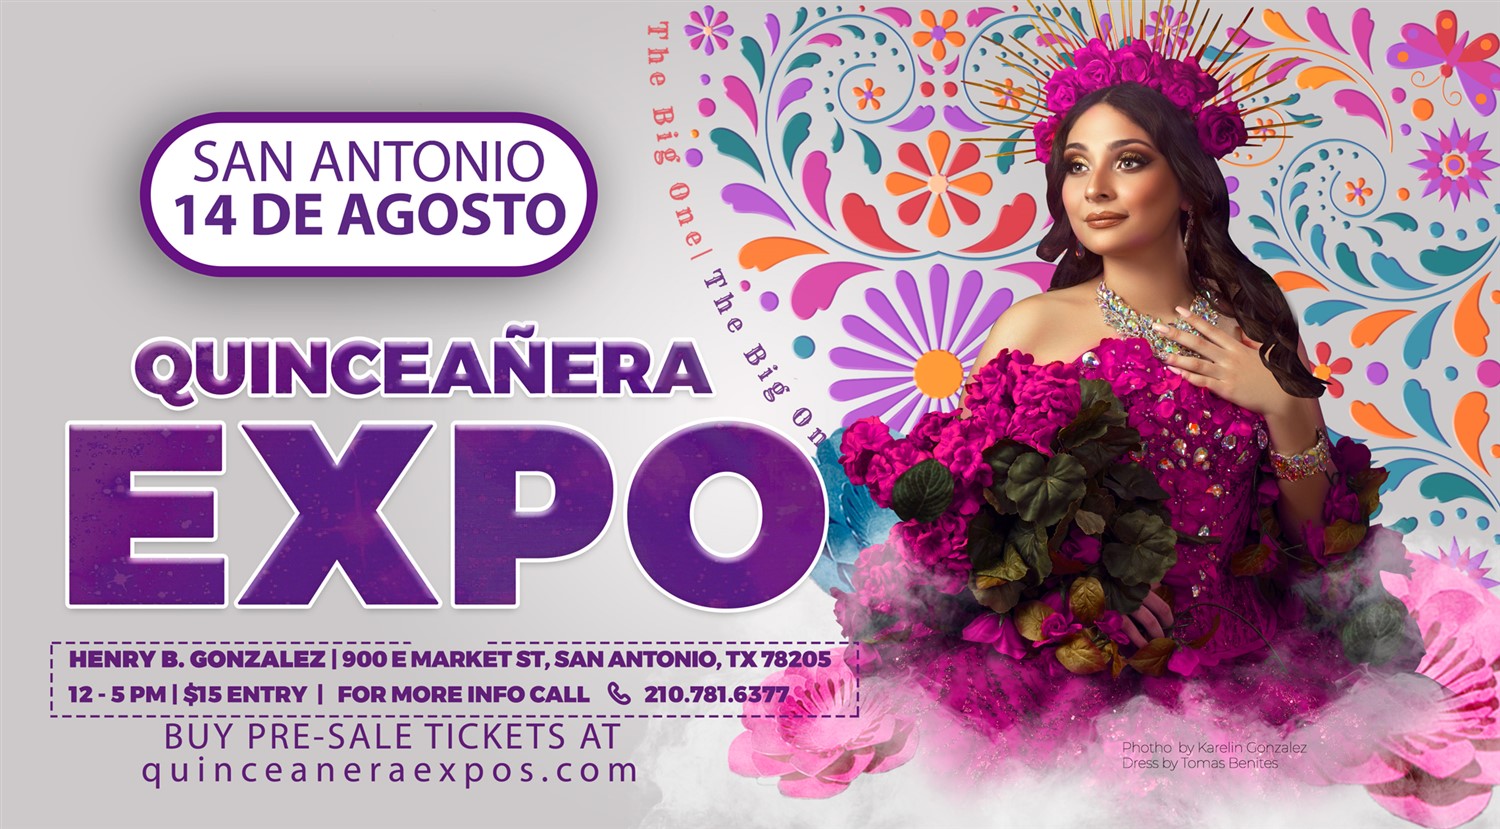 Quinceanera Expo San Antonio August 14th 2022 At the Henry B. Gonzalez Conv.  on Aug 14, 12:00@Henry B. Gonzalez Convention Center - Buy tickets and Get information on Quinceanera Expo 